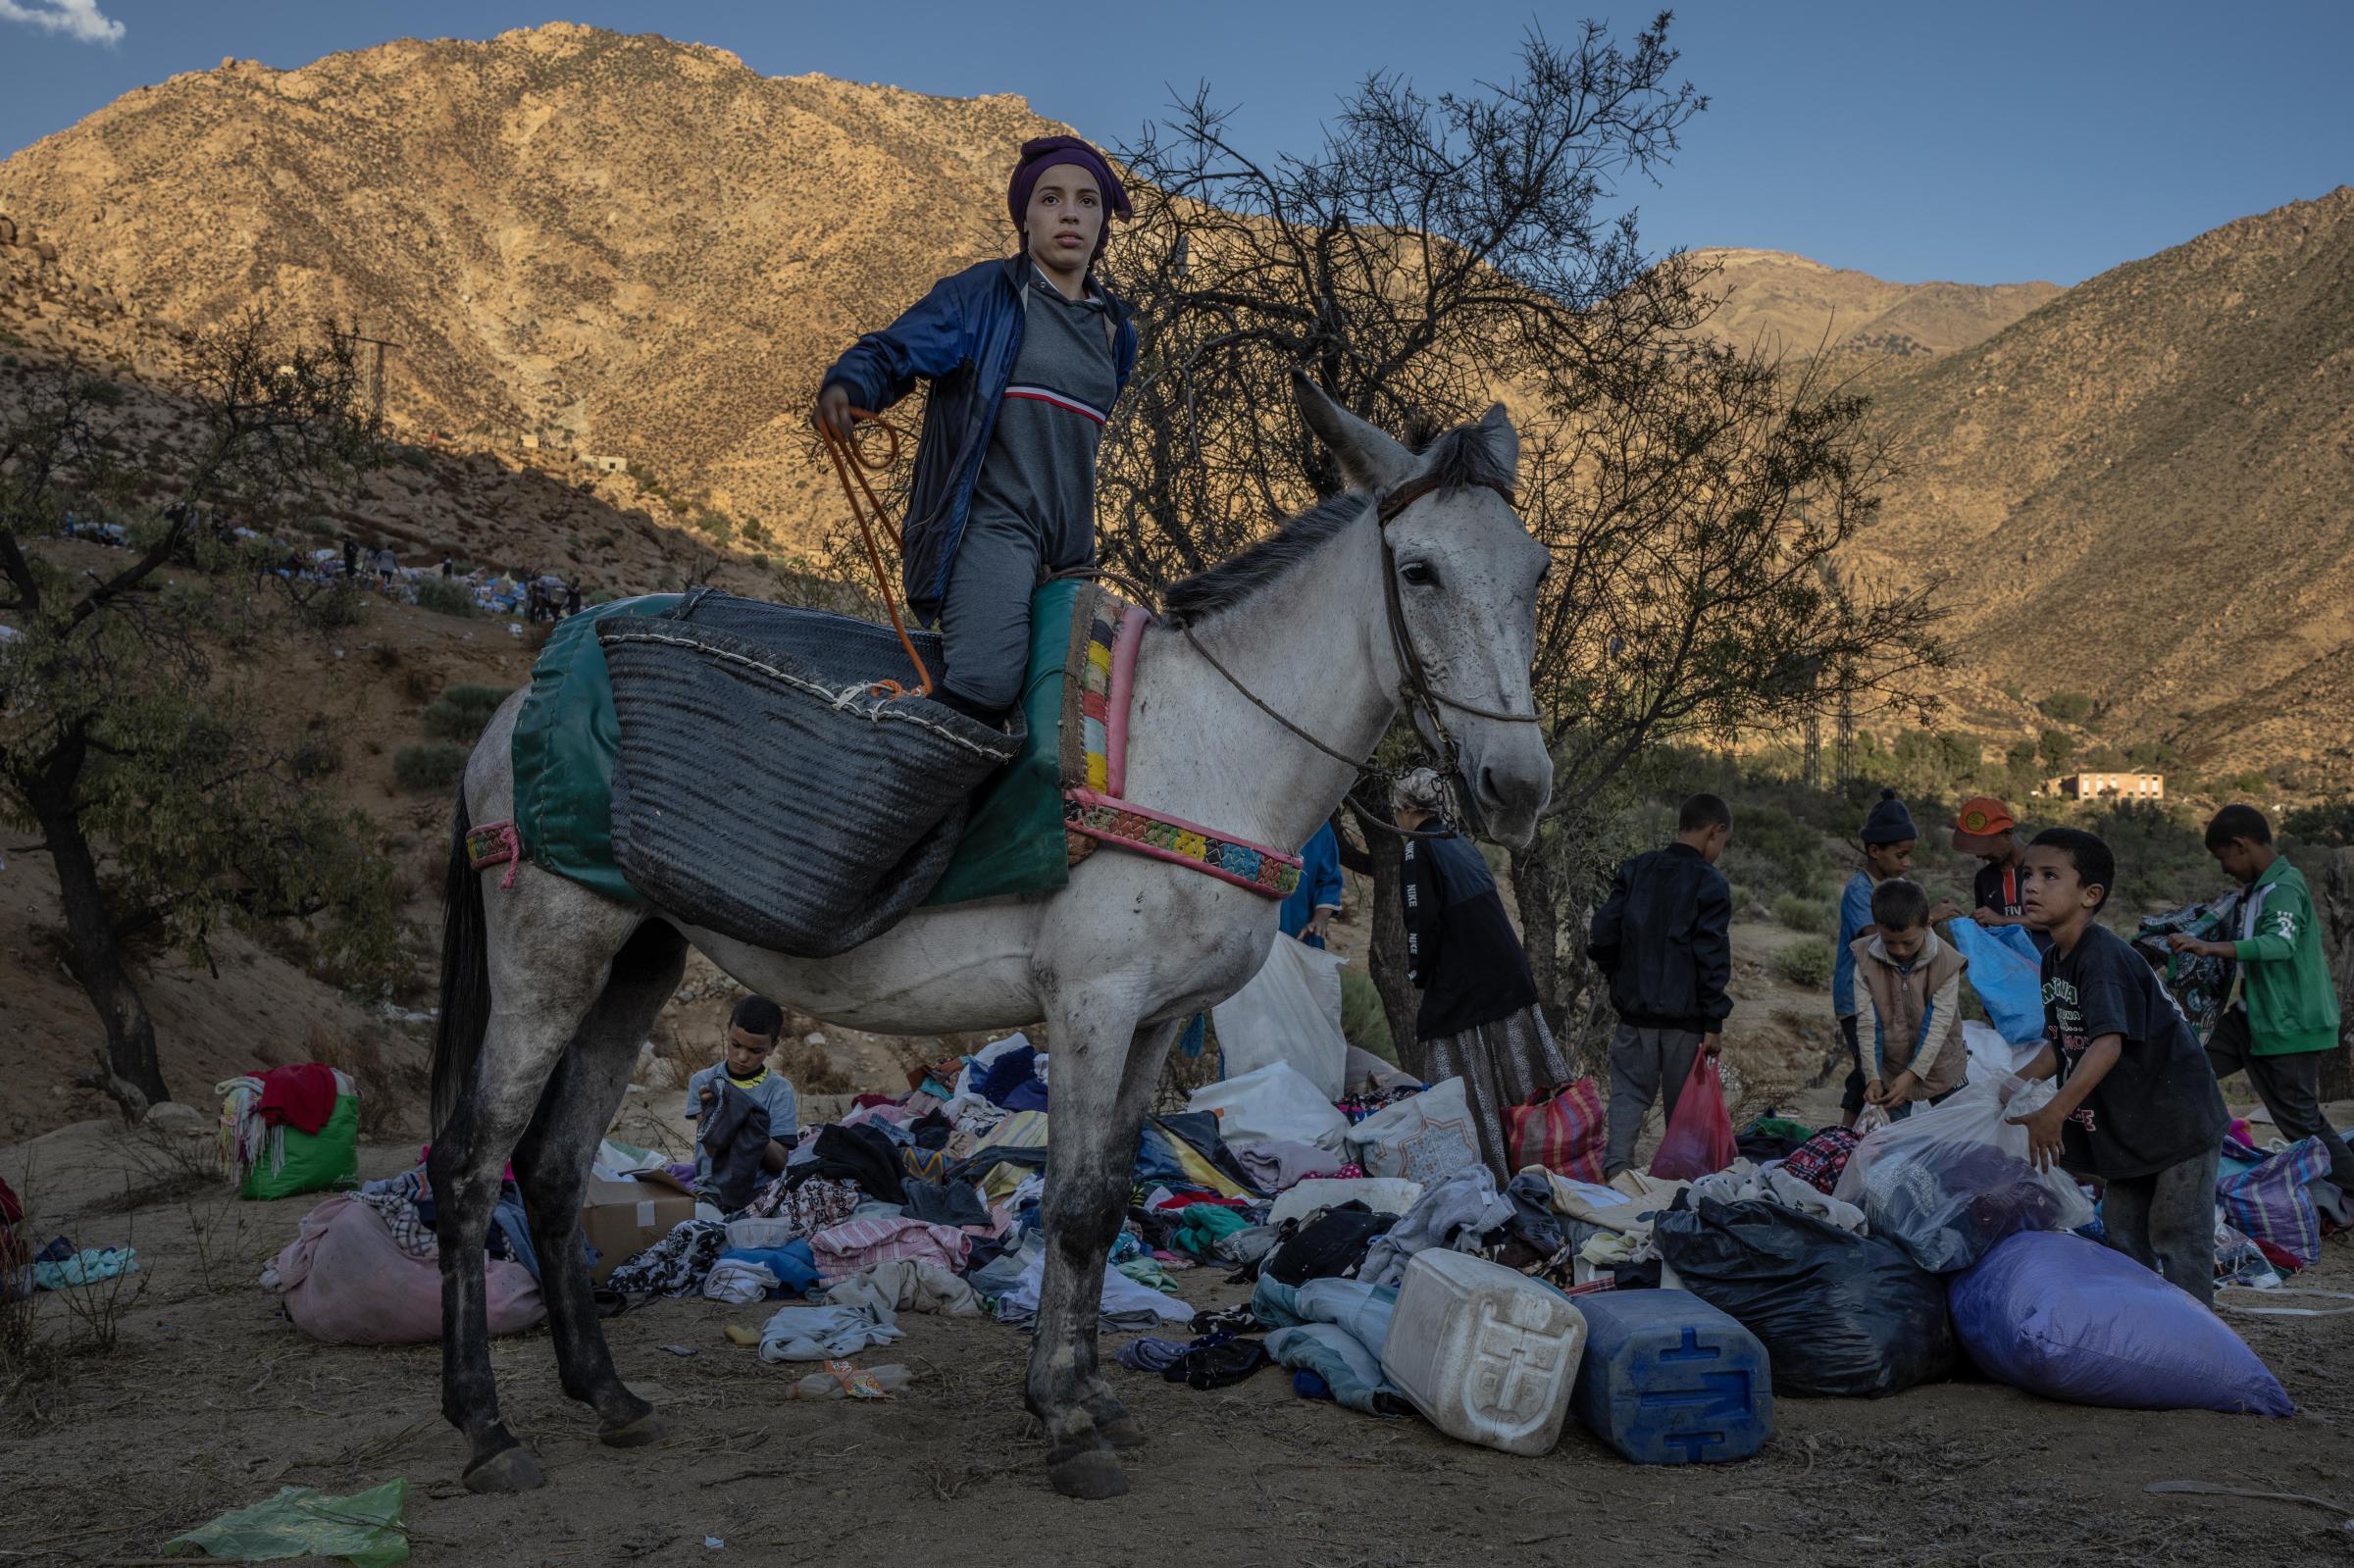 Morocco Earthquake - 15-year-old Hanna, rides her horse through the mountains...